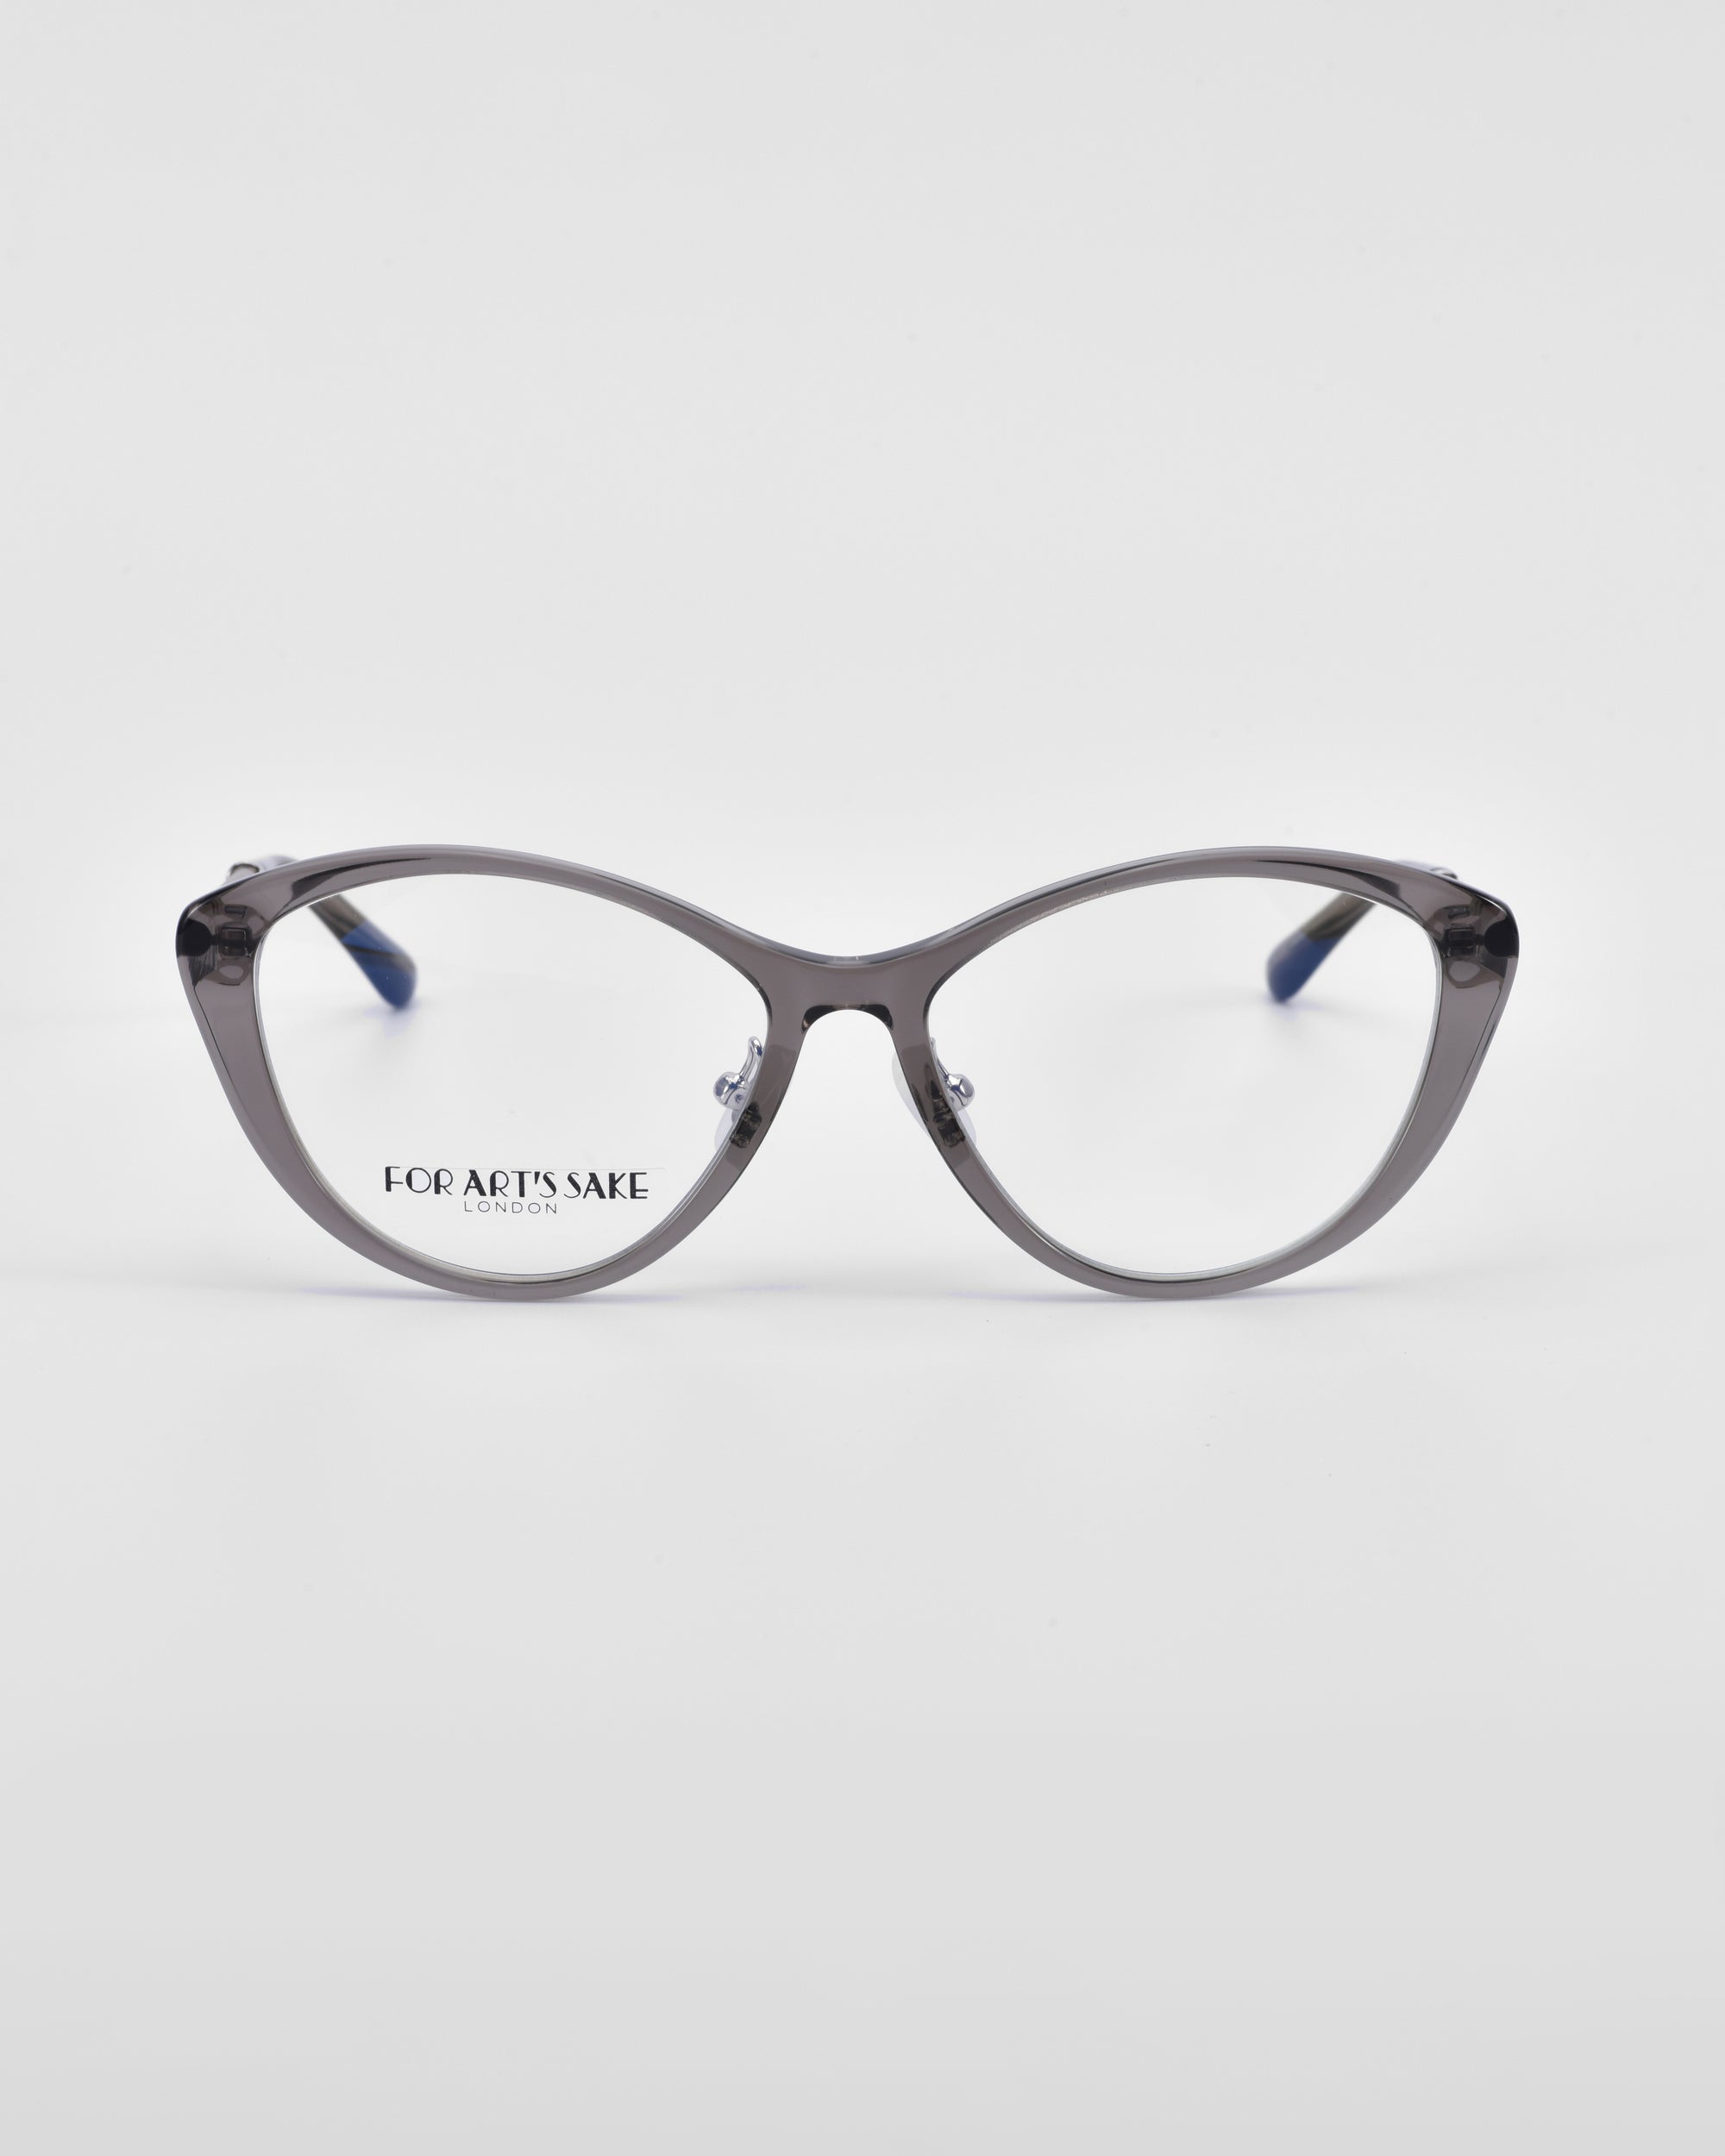 A pair of gray-framed eyeglasses with a cat-eye design, featuring 18-karat gold plating and the brand &quot;For Art&#39;s Sake®&quot; inscribed on one lens, is centered against a plain white background. The model is called Perla II.